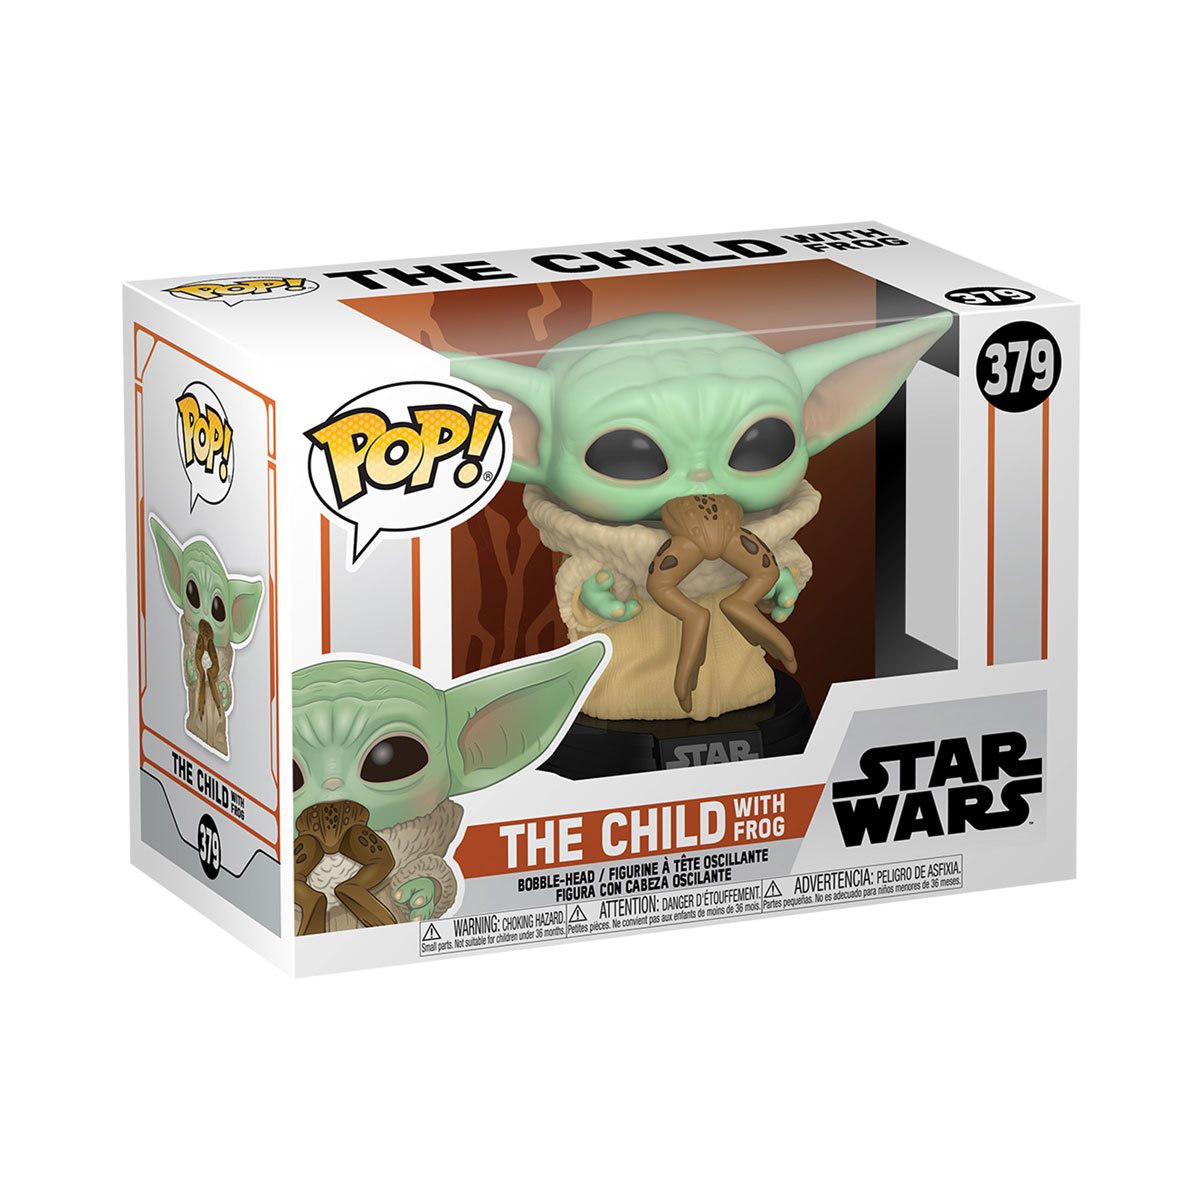 Star Wars: The Mandalorian The Child with Frog Vinyl Figure By Funko Pop!